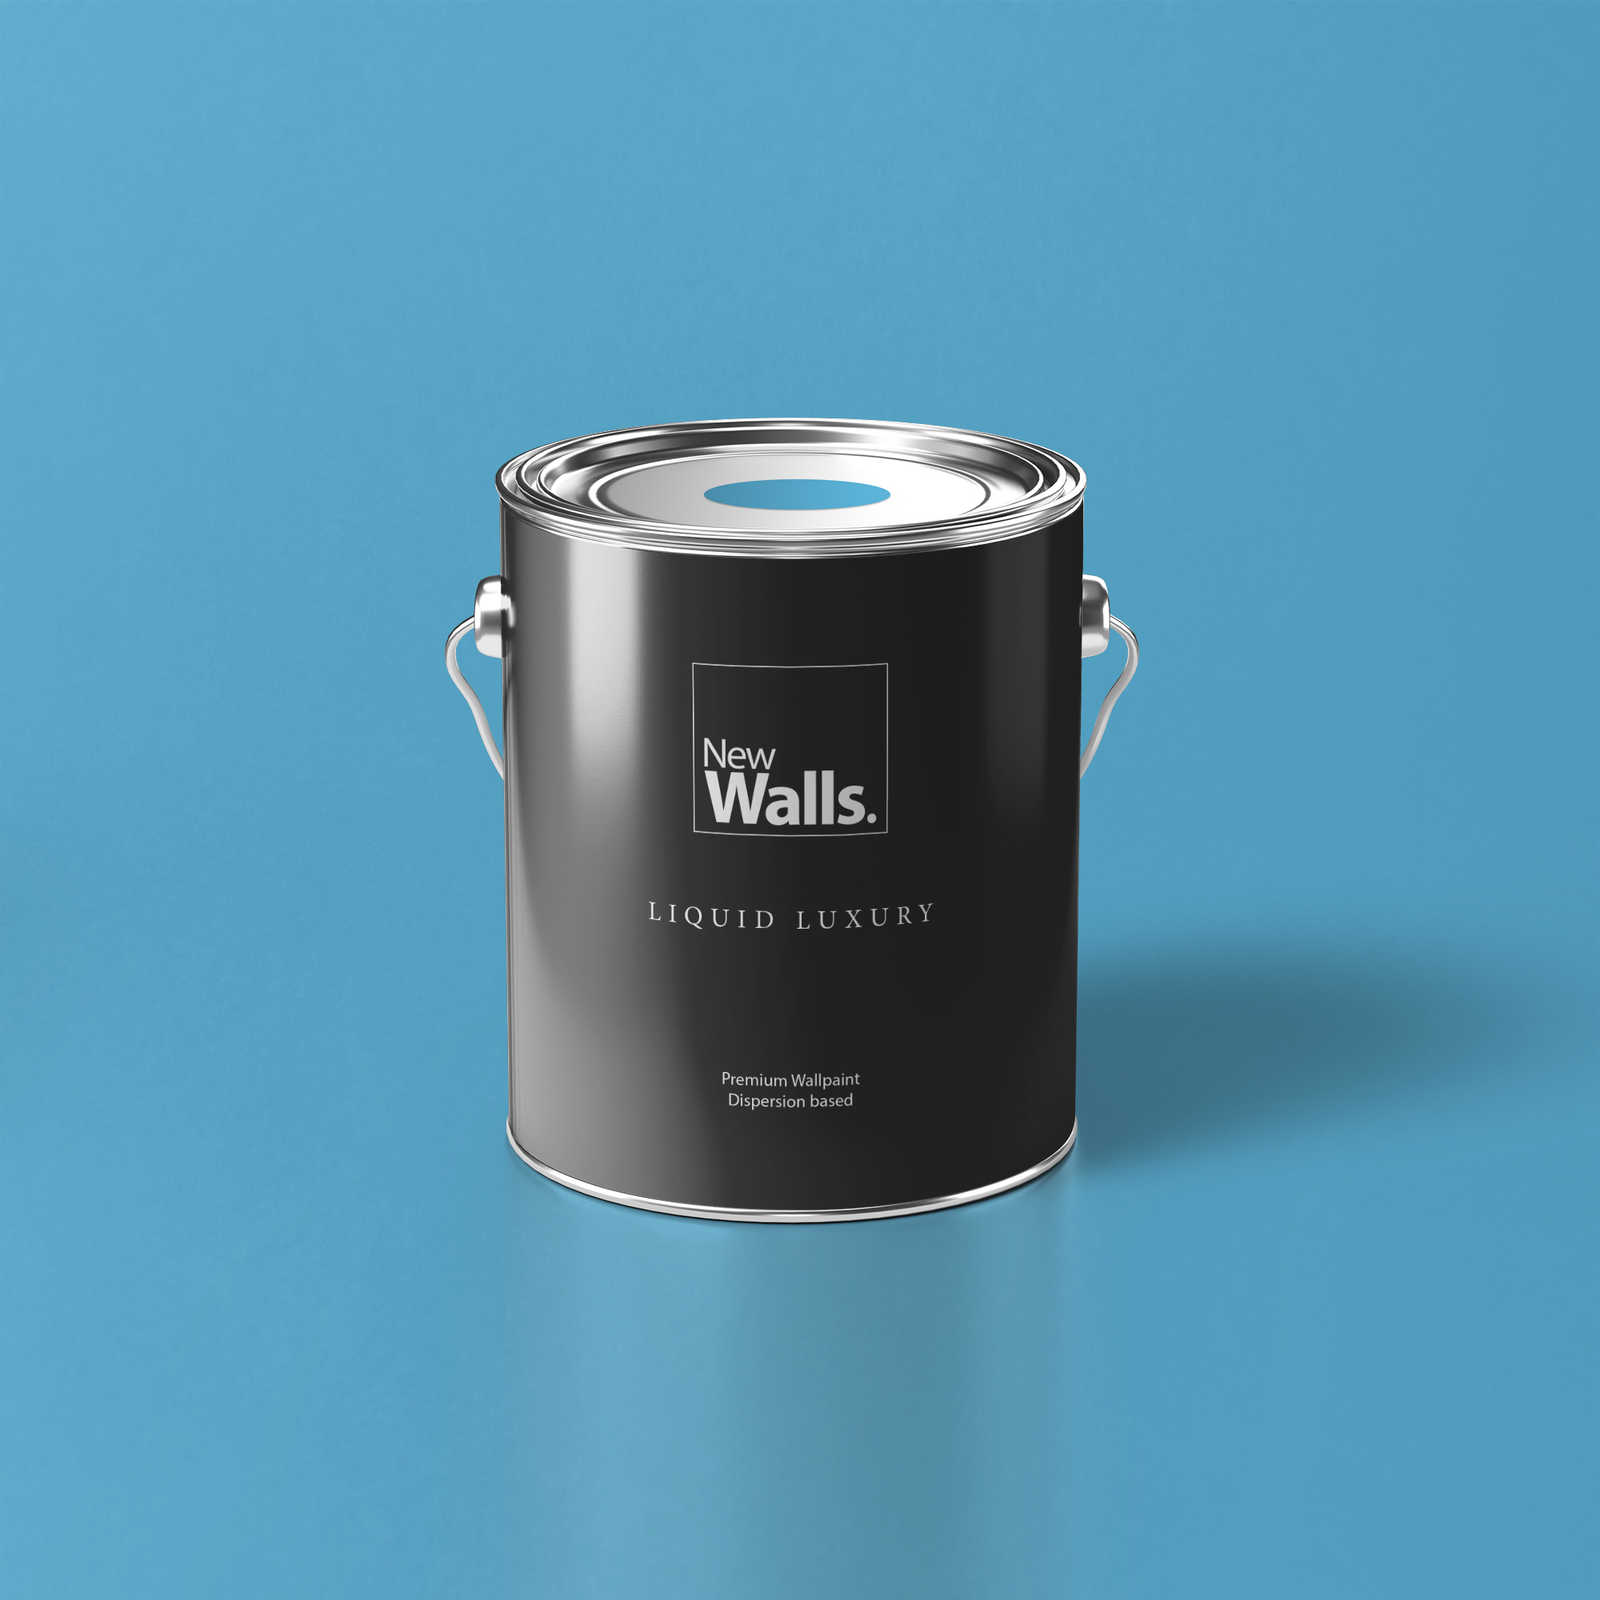 Premium Wall Paint Radiant Ice Blue »Blissful Blue« NW302 – 5 litre
